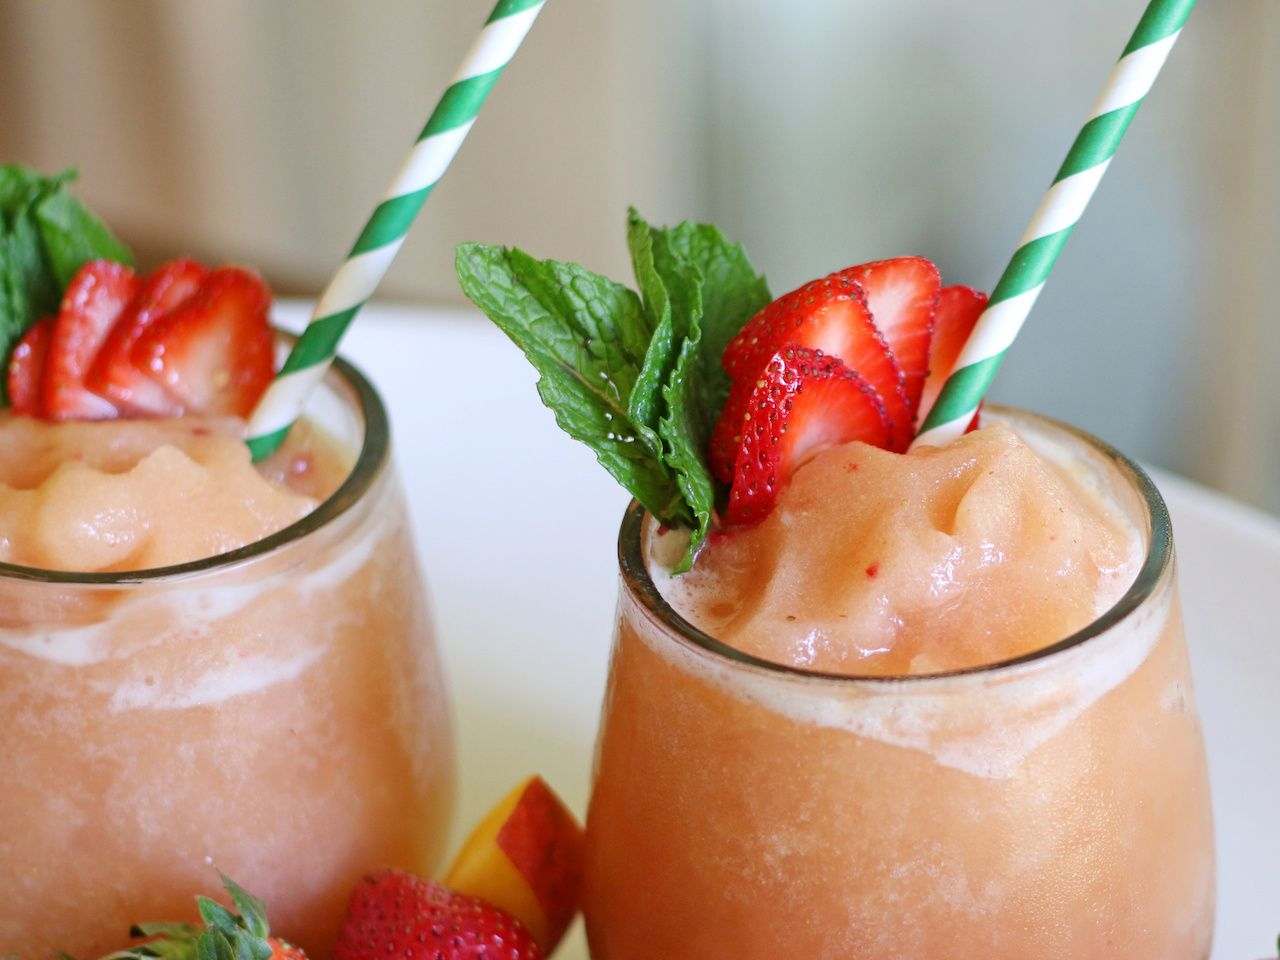 Slush our cocktails with strawberries and peaches for the summer